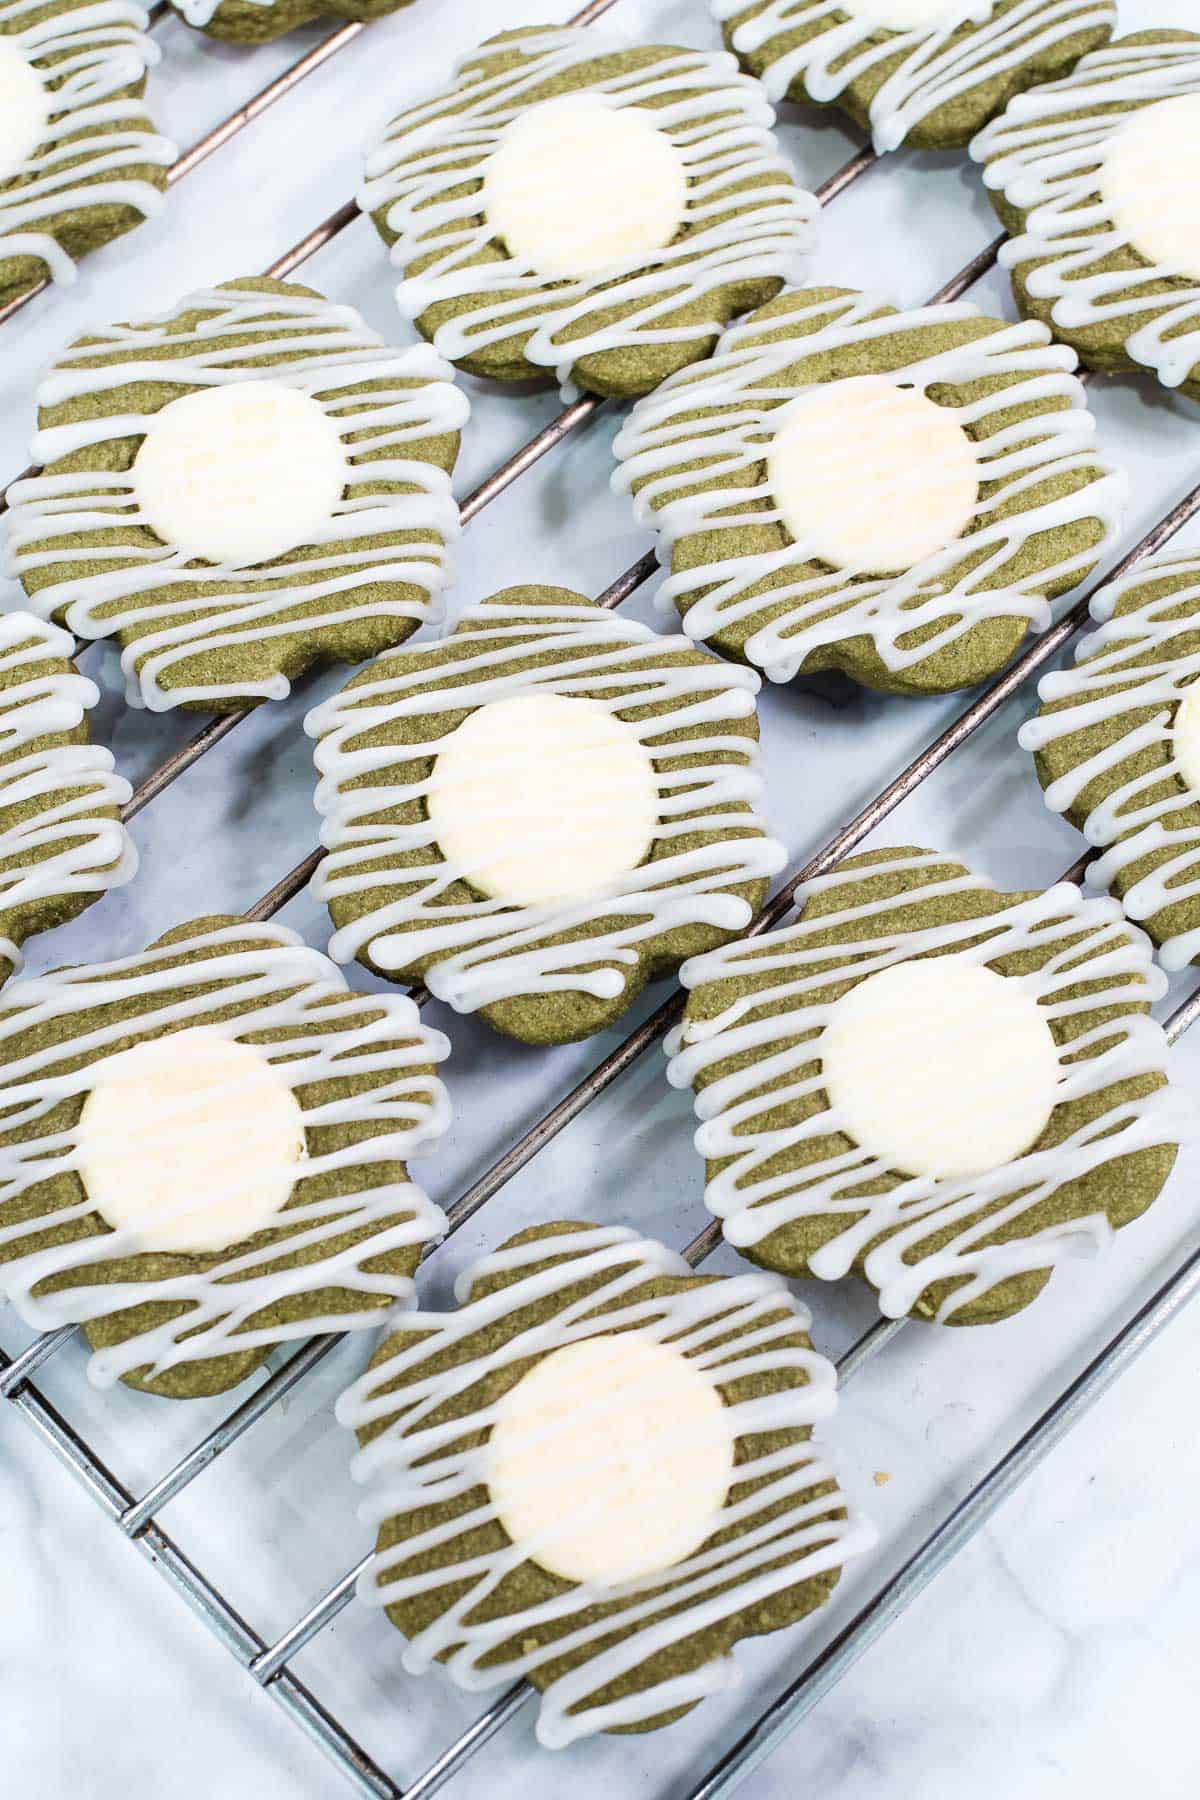 Green flower shaped cookies with white centers and icing drizzle, arranged on a wire rack.